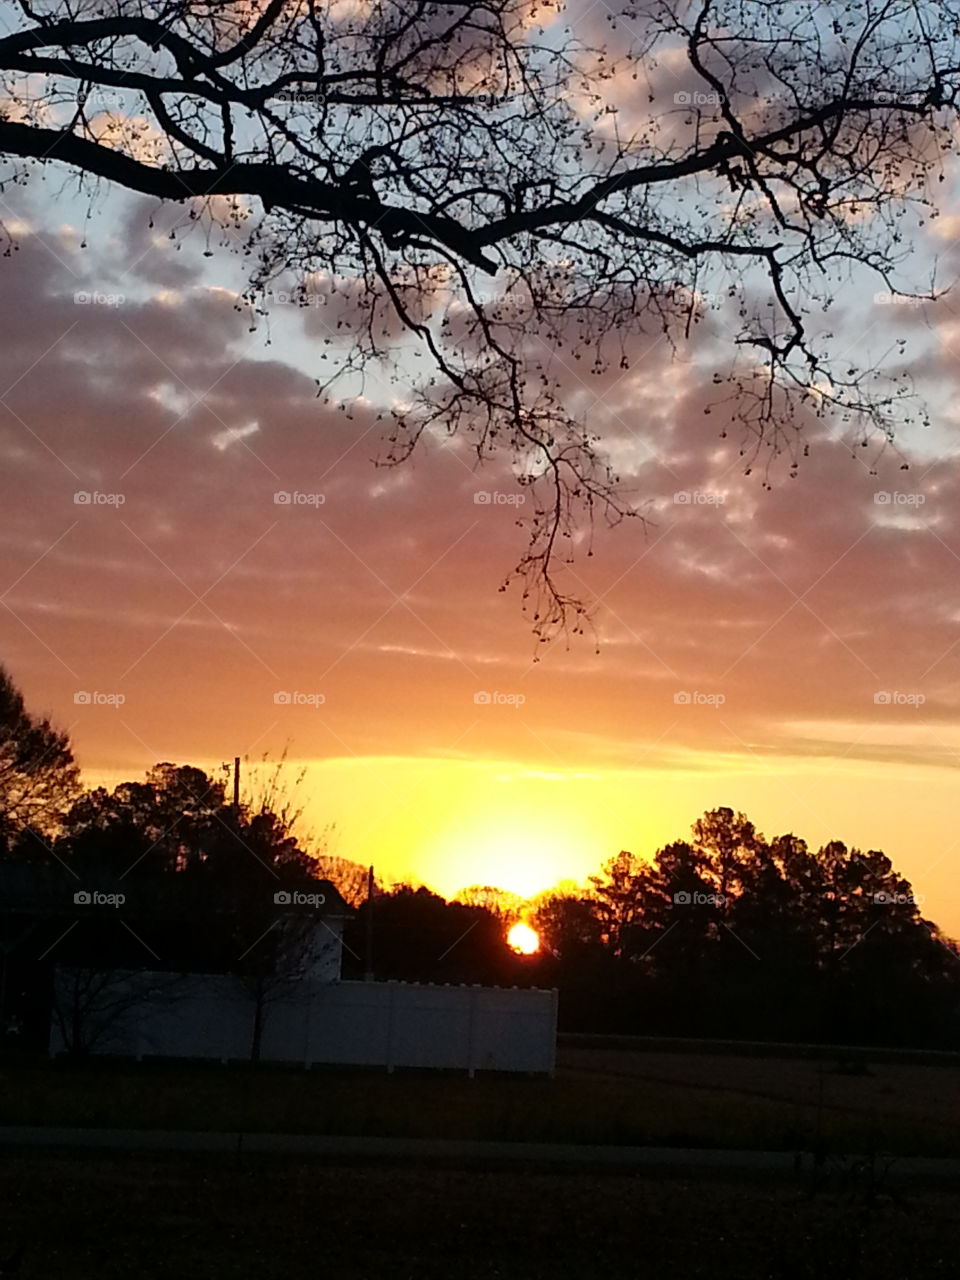 Sunrise in South Louisiana. I was at my mom's house early one morning drinking coffee when I saw the beautiful sunrise!